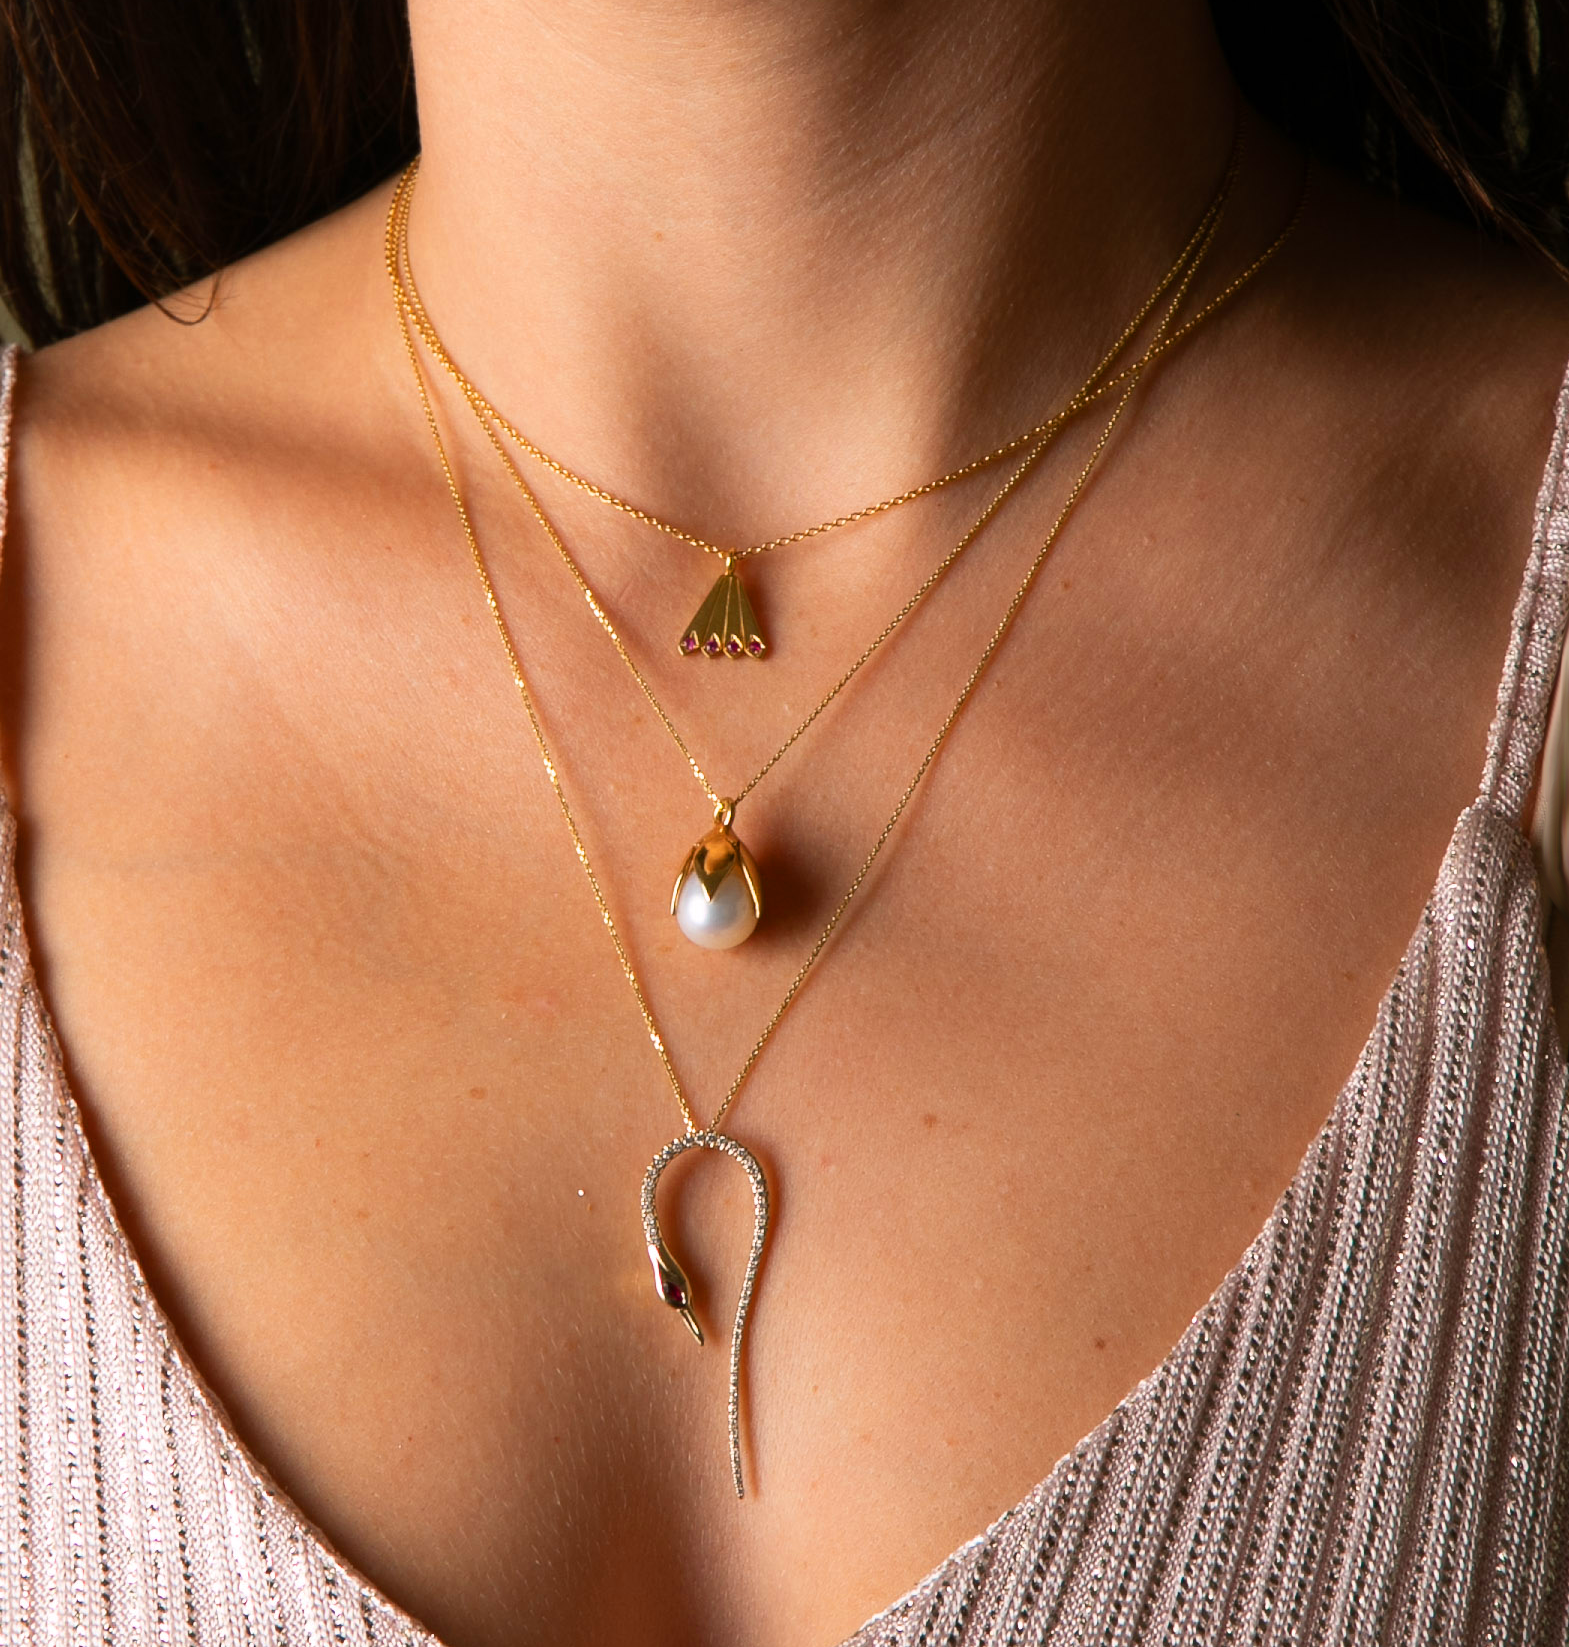 Peacock's Tail Necklace - 14K Gold - Danielle Gerber Freedom Jewelry